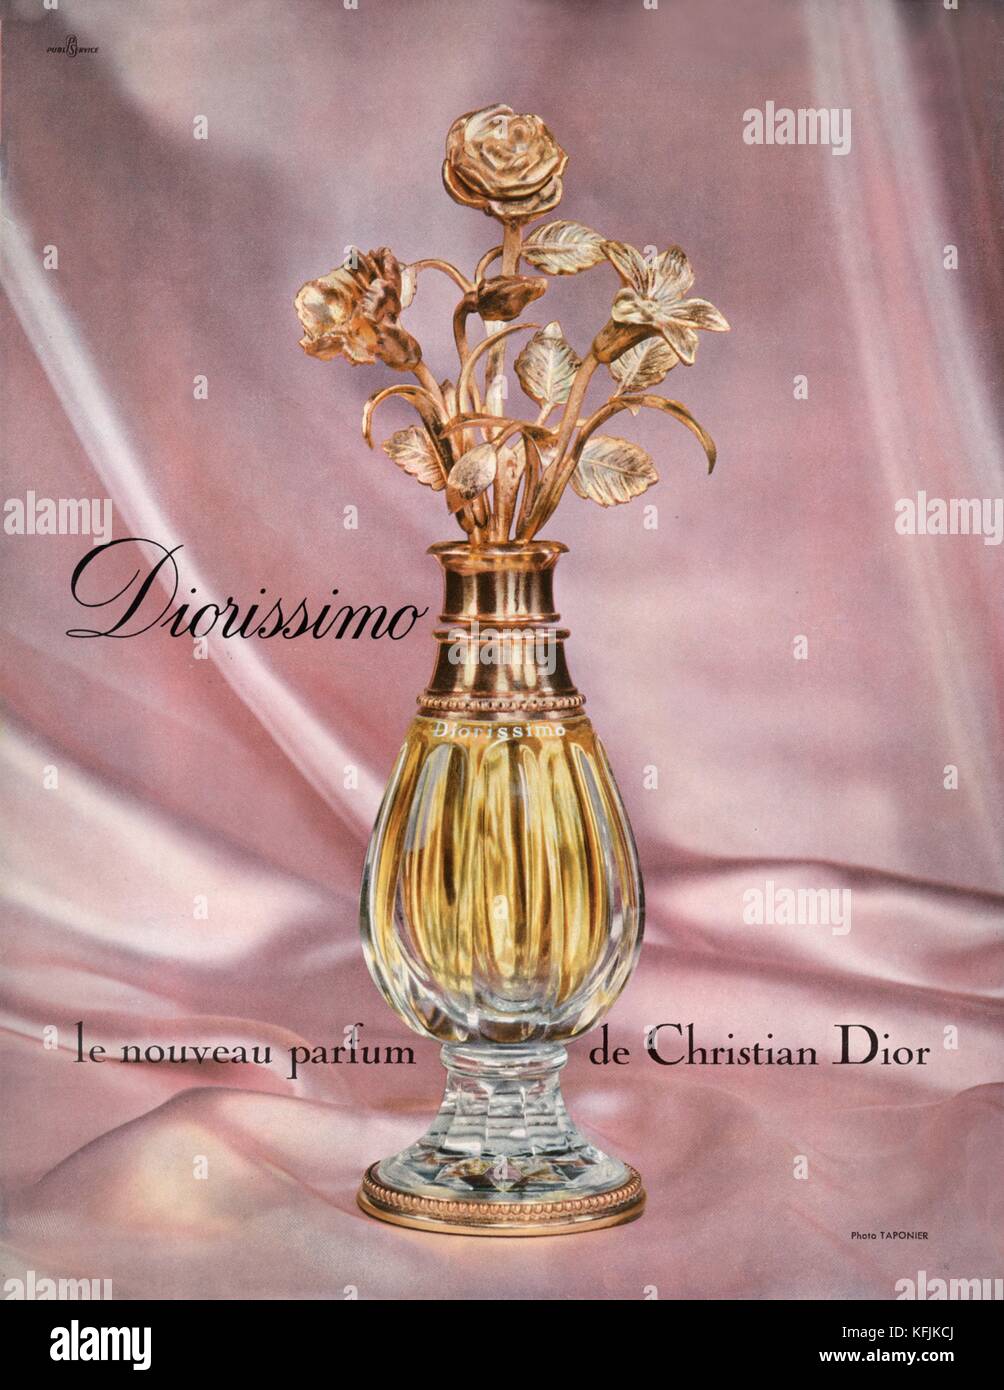 Advert 'Diorissimo, le nouveau parfum de Christian Dior' ('Diorissimo, the new fragrance by Christian Dior')  Launched by Edmond Roudniska  Around 1956    Taponier Photo credit:Photo12/Coll. Taponier Stock Photo